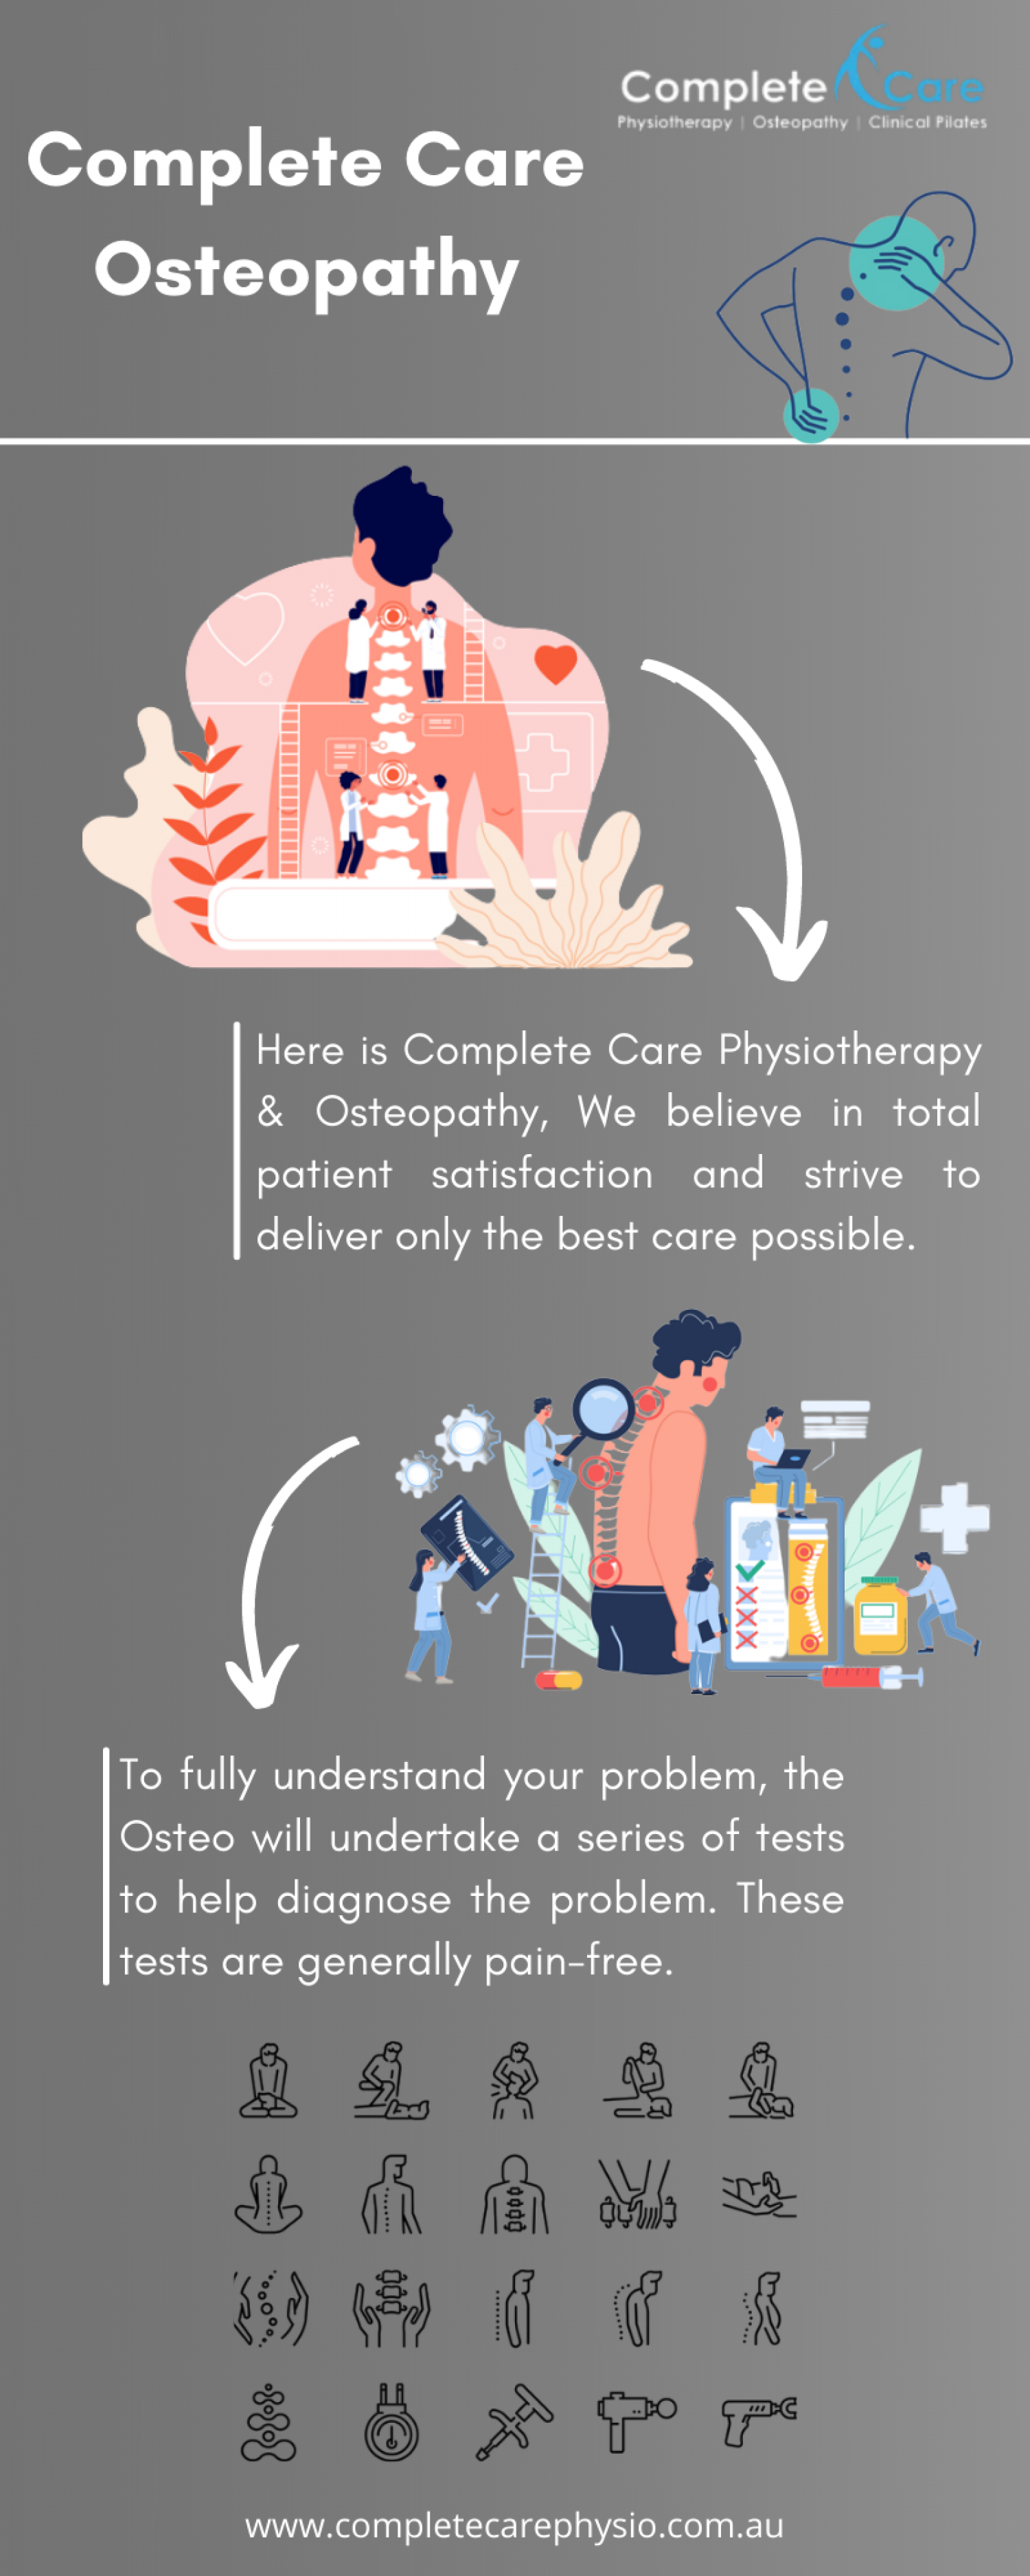 Complete Care Osteopathy Infographic